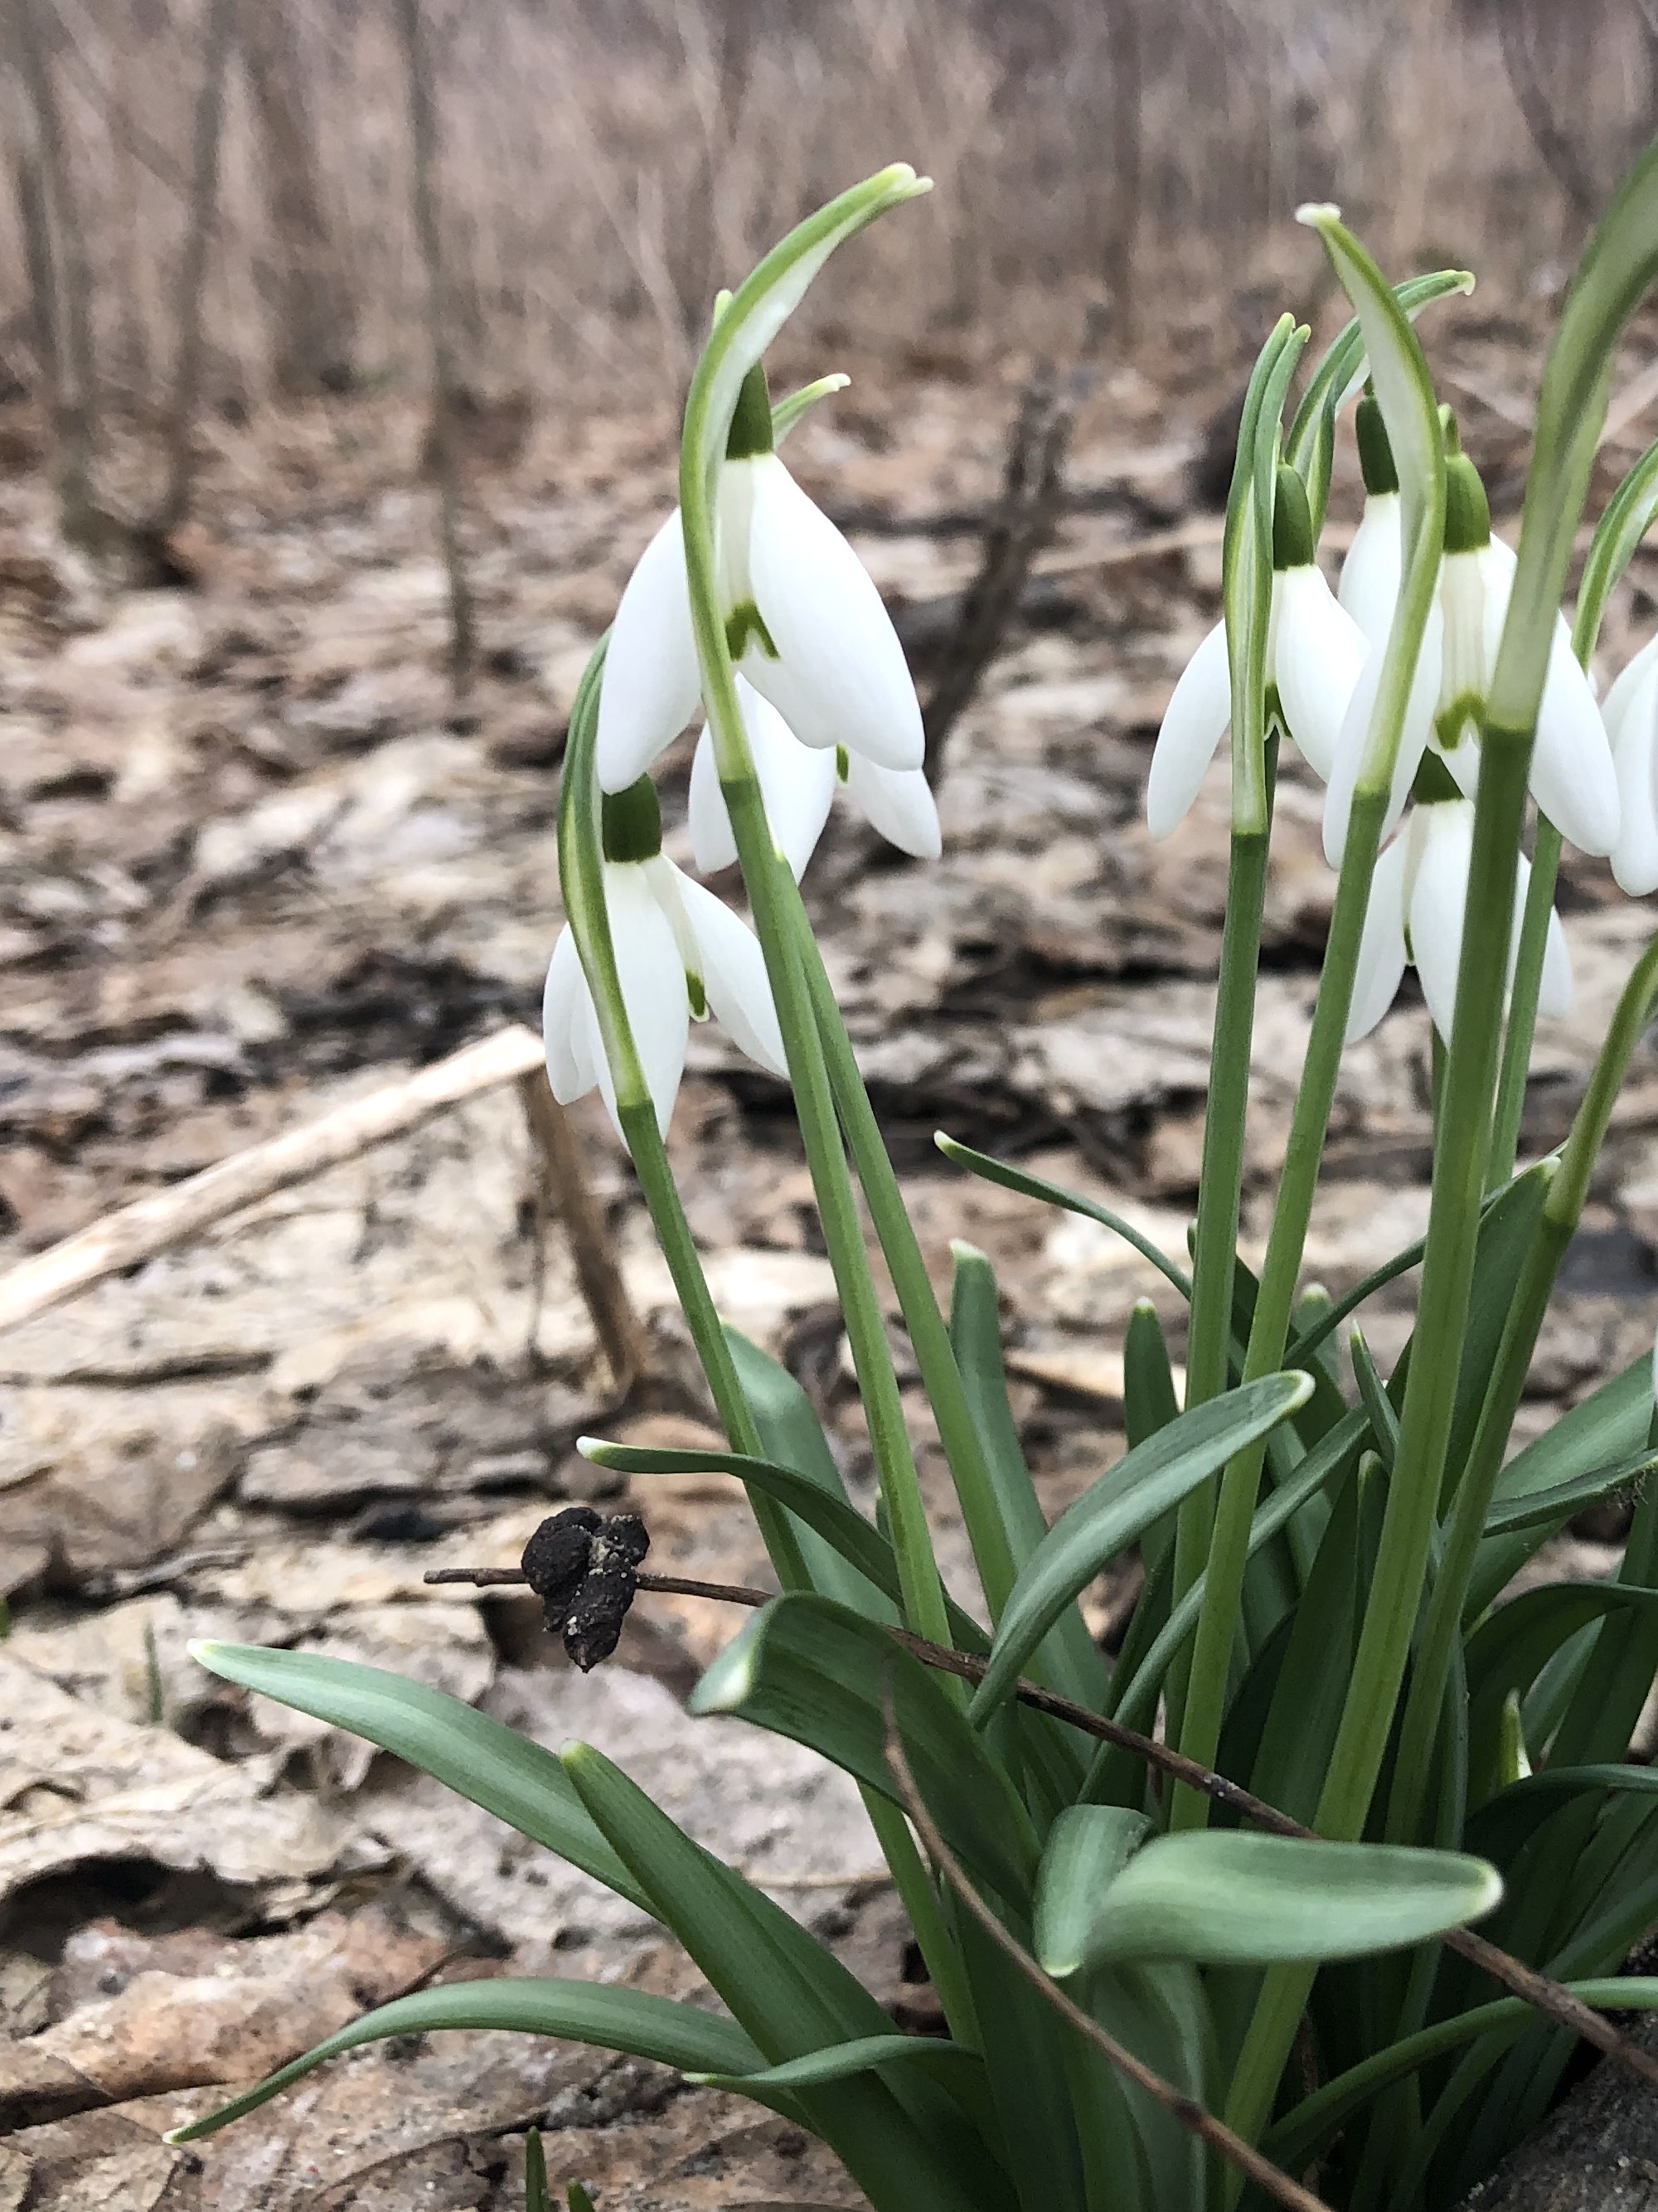 Snowdrops emerging in Madison Wisconsin along Arbor Drive on March 10, 2021.